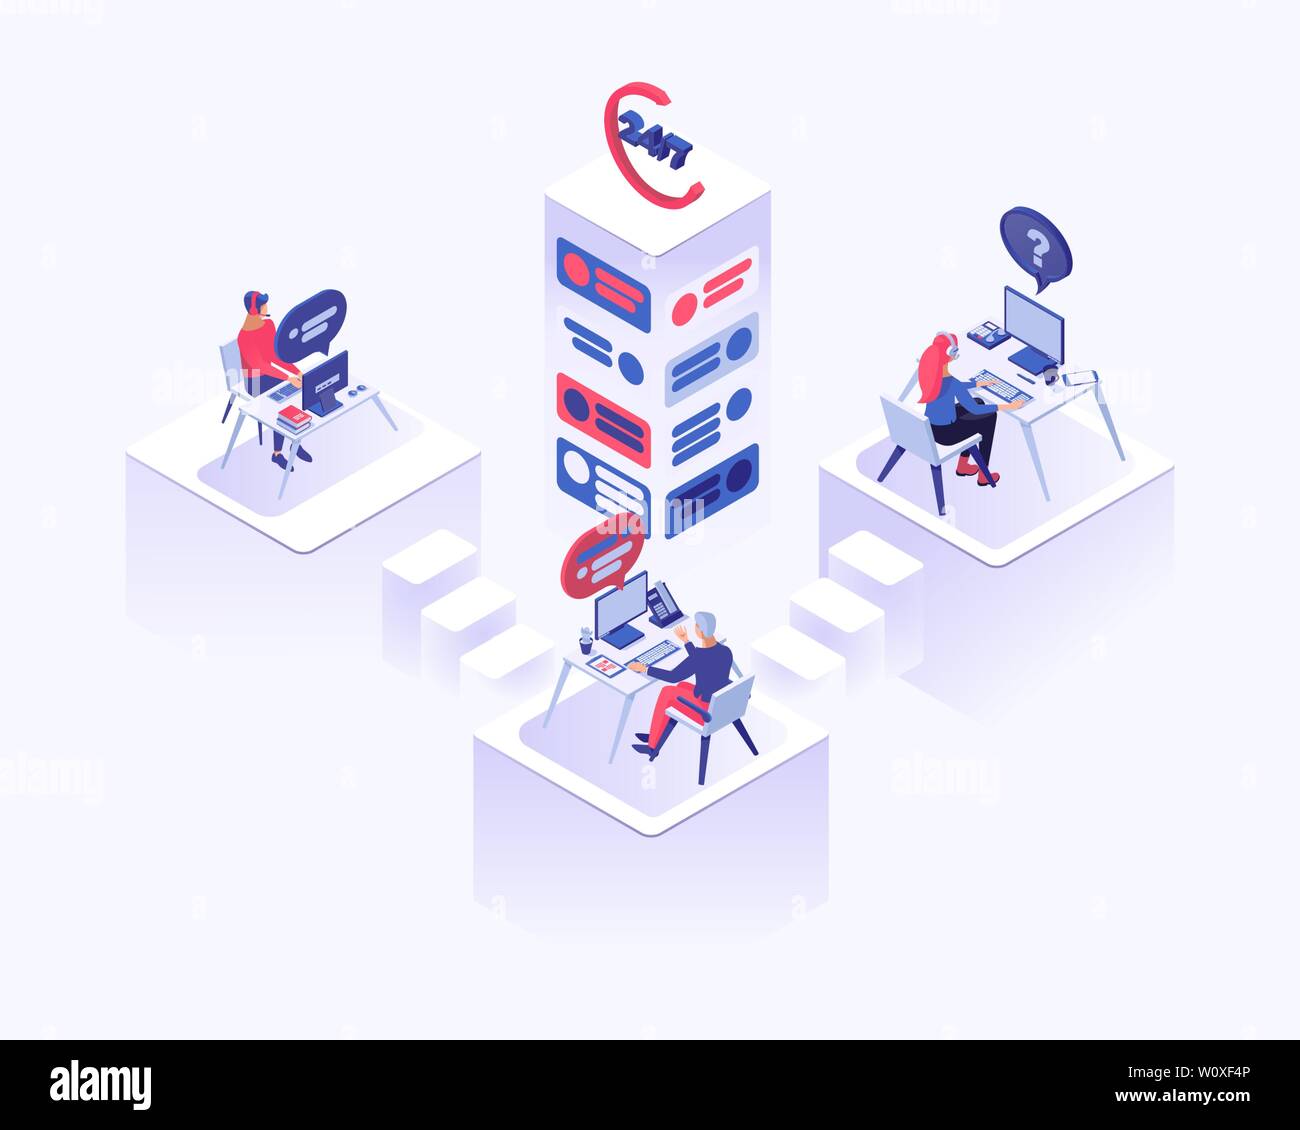 Call center office vector isometric illustration. Male and female consultant managers advising clients 3d cartoon characters. Tech support, office workers with headset sitting at desk Stock Vector